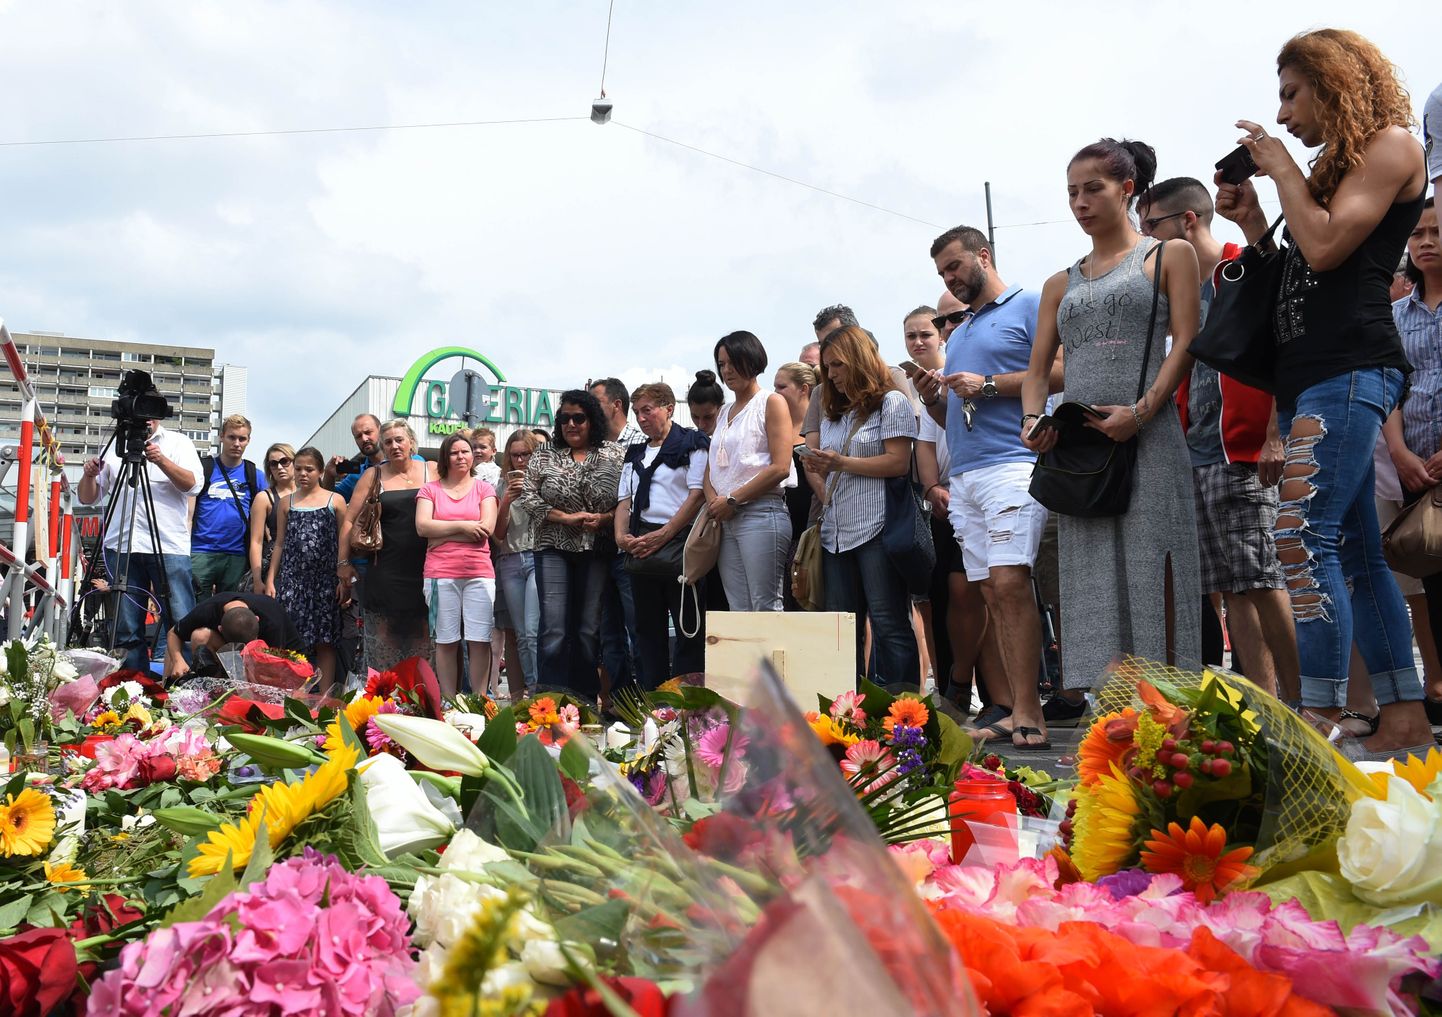 People stand next to flowers laid down on July 23, 2016 for the victims of the shooting near the Olympia-Einkaufszentrum shopping centre in Munich, southern Germany, one day after the attack.
Police were probing the motives of the lone teenage German-Iranian gunman who went on a deadly rampage at a busy Munich shopping centre, the third bloody attack on civilians in Europe in just over a week. Nine people were killed and another 16 wounded as the black-clad gunman brought terror to Germany's third largest city on Friday evening, July 22, 2016, before committing suicide. / AFP PHOTO / Christof Stache